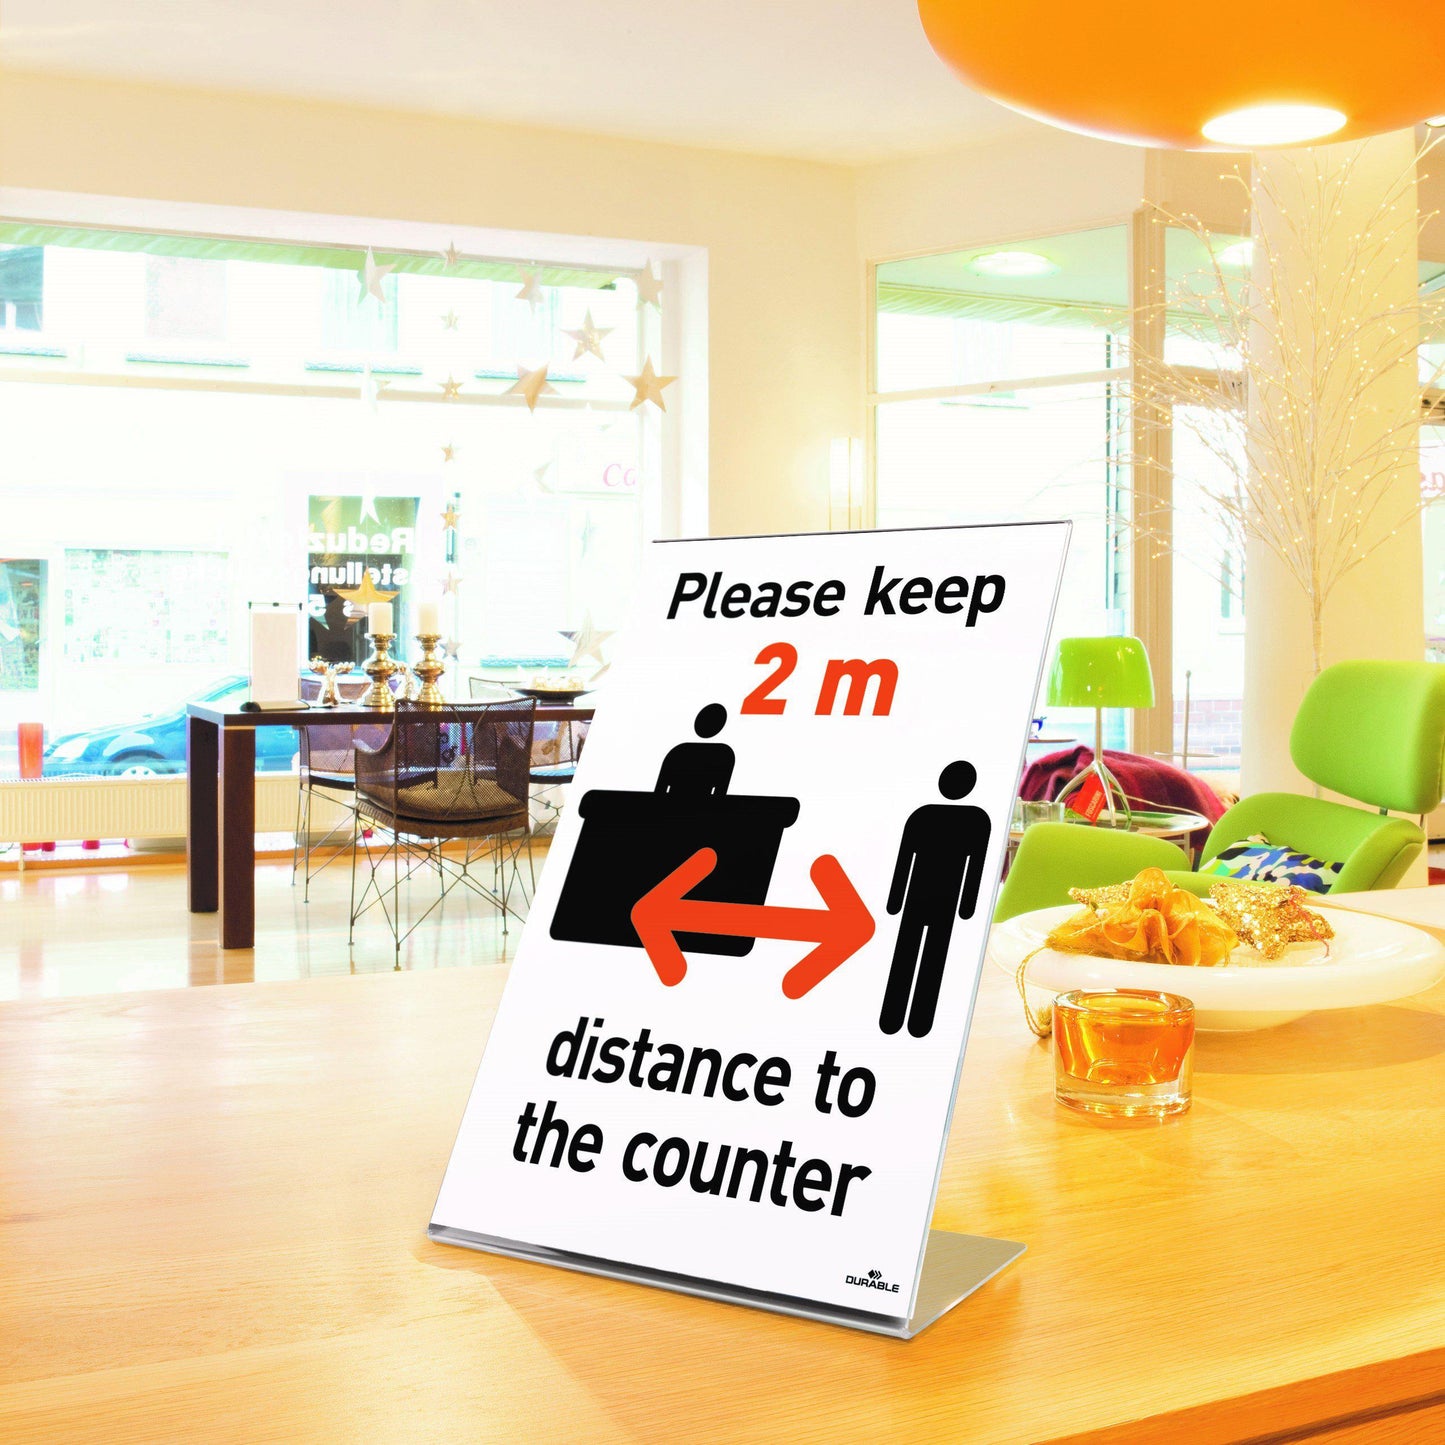 Clear Acrylic Display Sign Holder L-Shaped Stackable Tabletop Stand easy-access A4 PPE social distancing info Counter Posters PK 2-2 x A4-Distinct Designs (London) Ltd